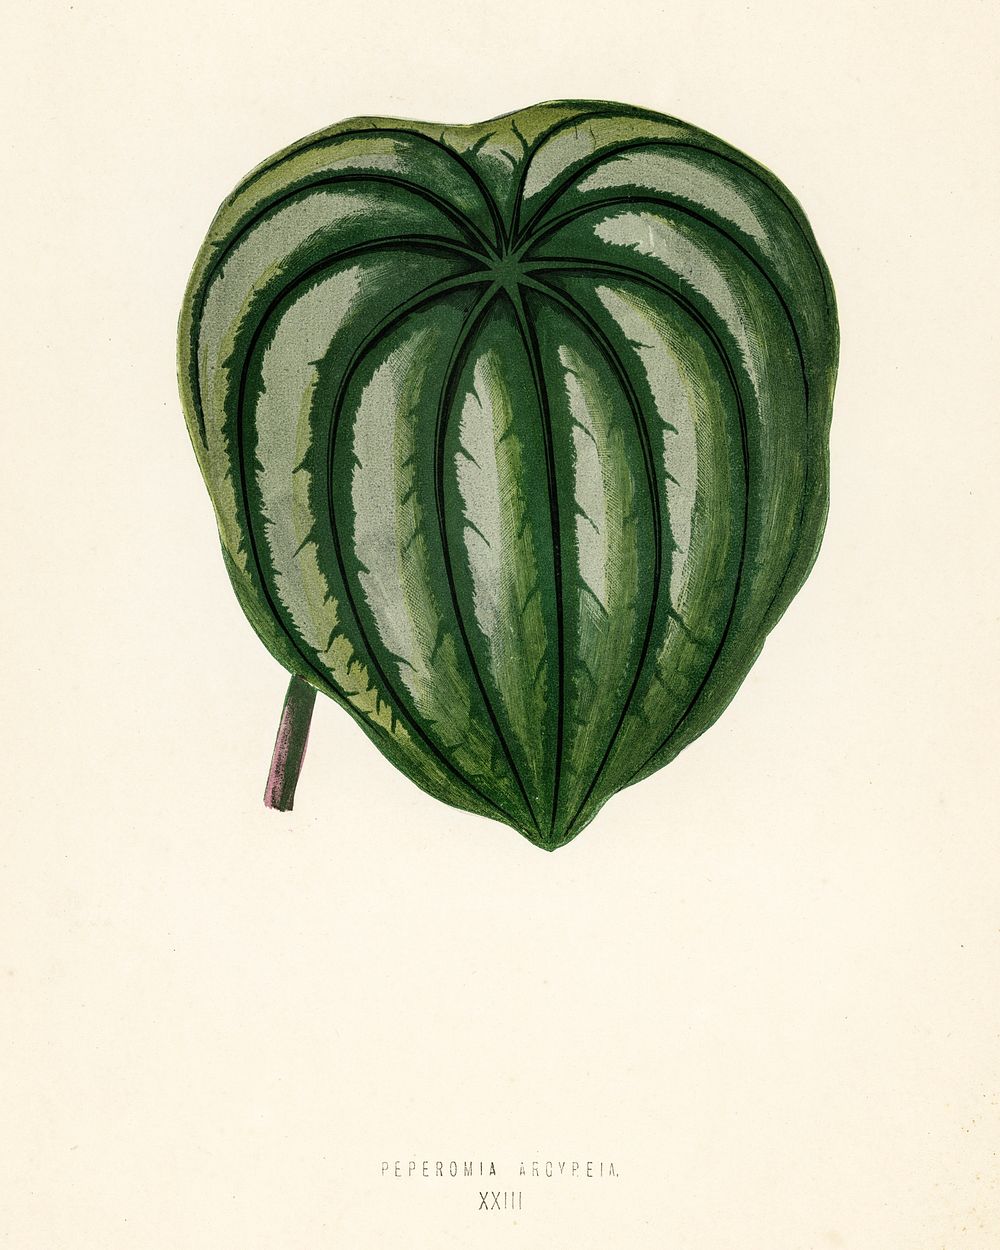 Pepper Elder (Peperomia Aroypeia). Digitally enhanced from our own 1929 edition of New and Rare Beautiful-Leaved Plants by…